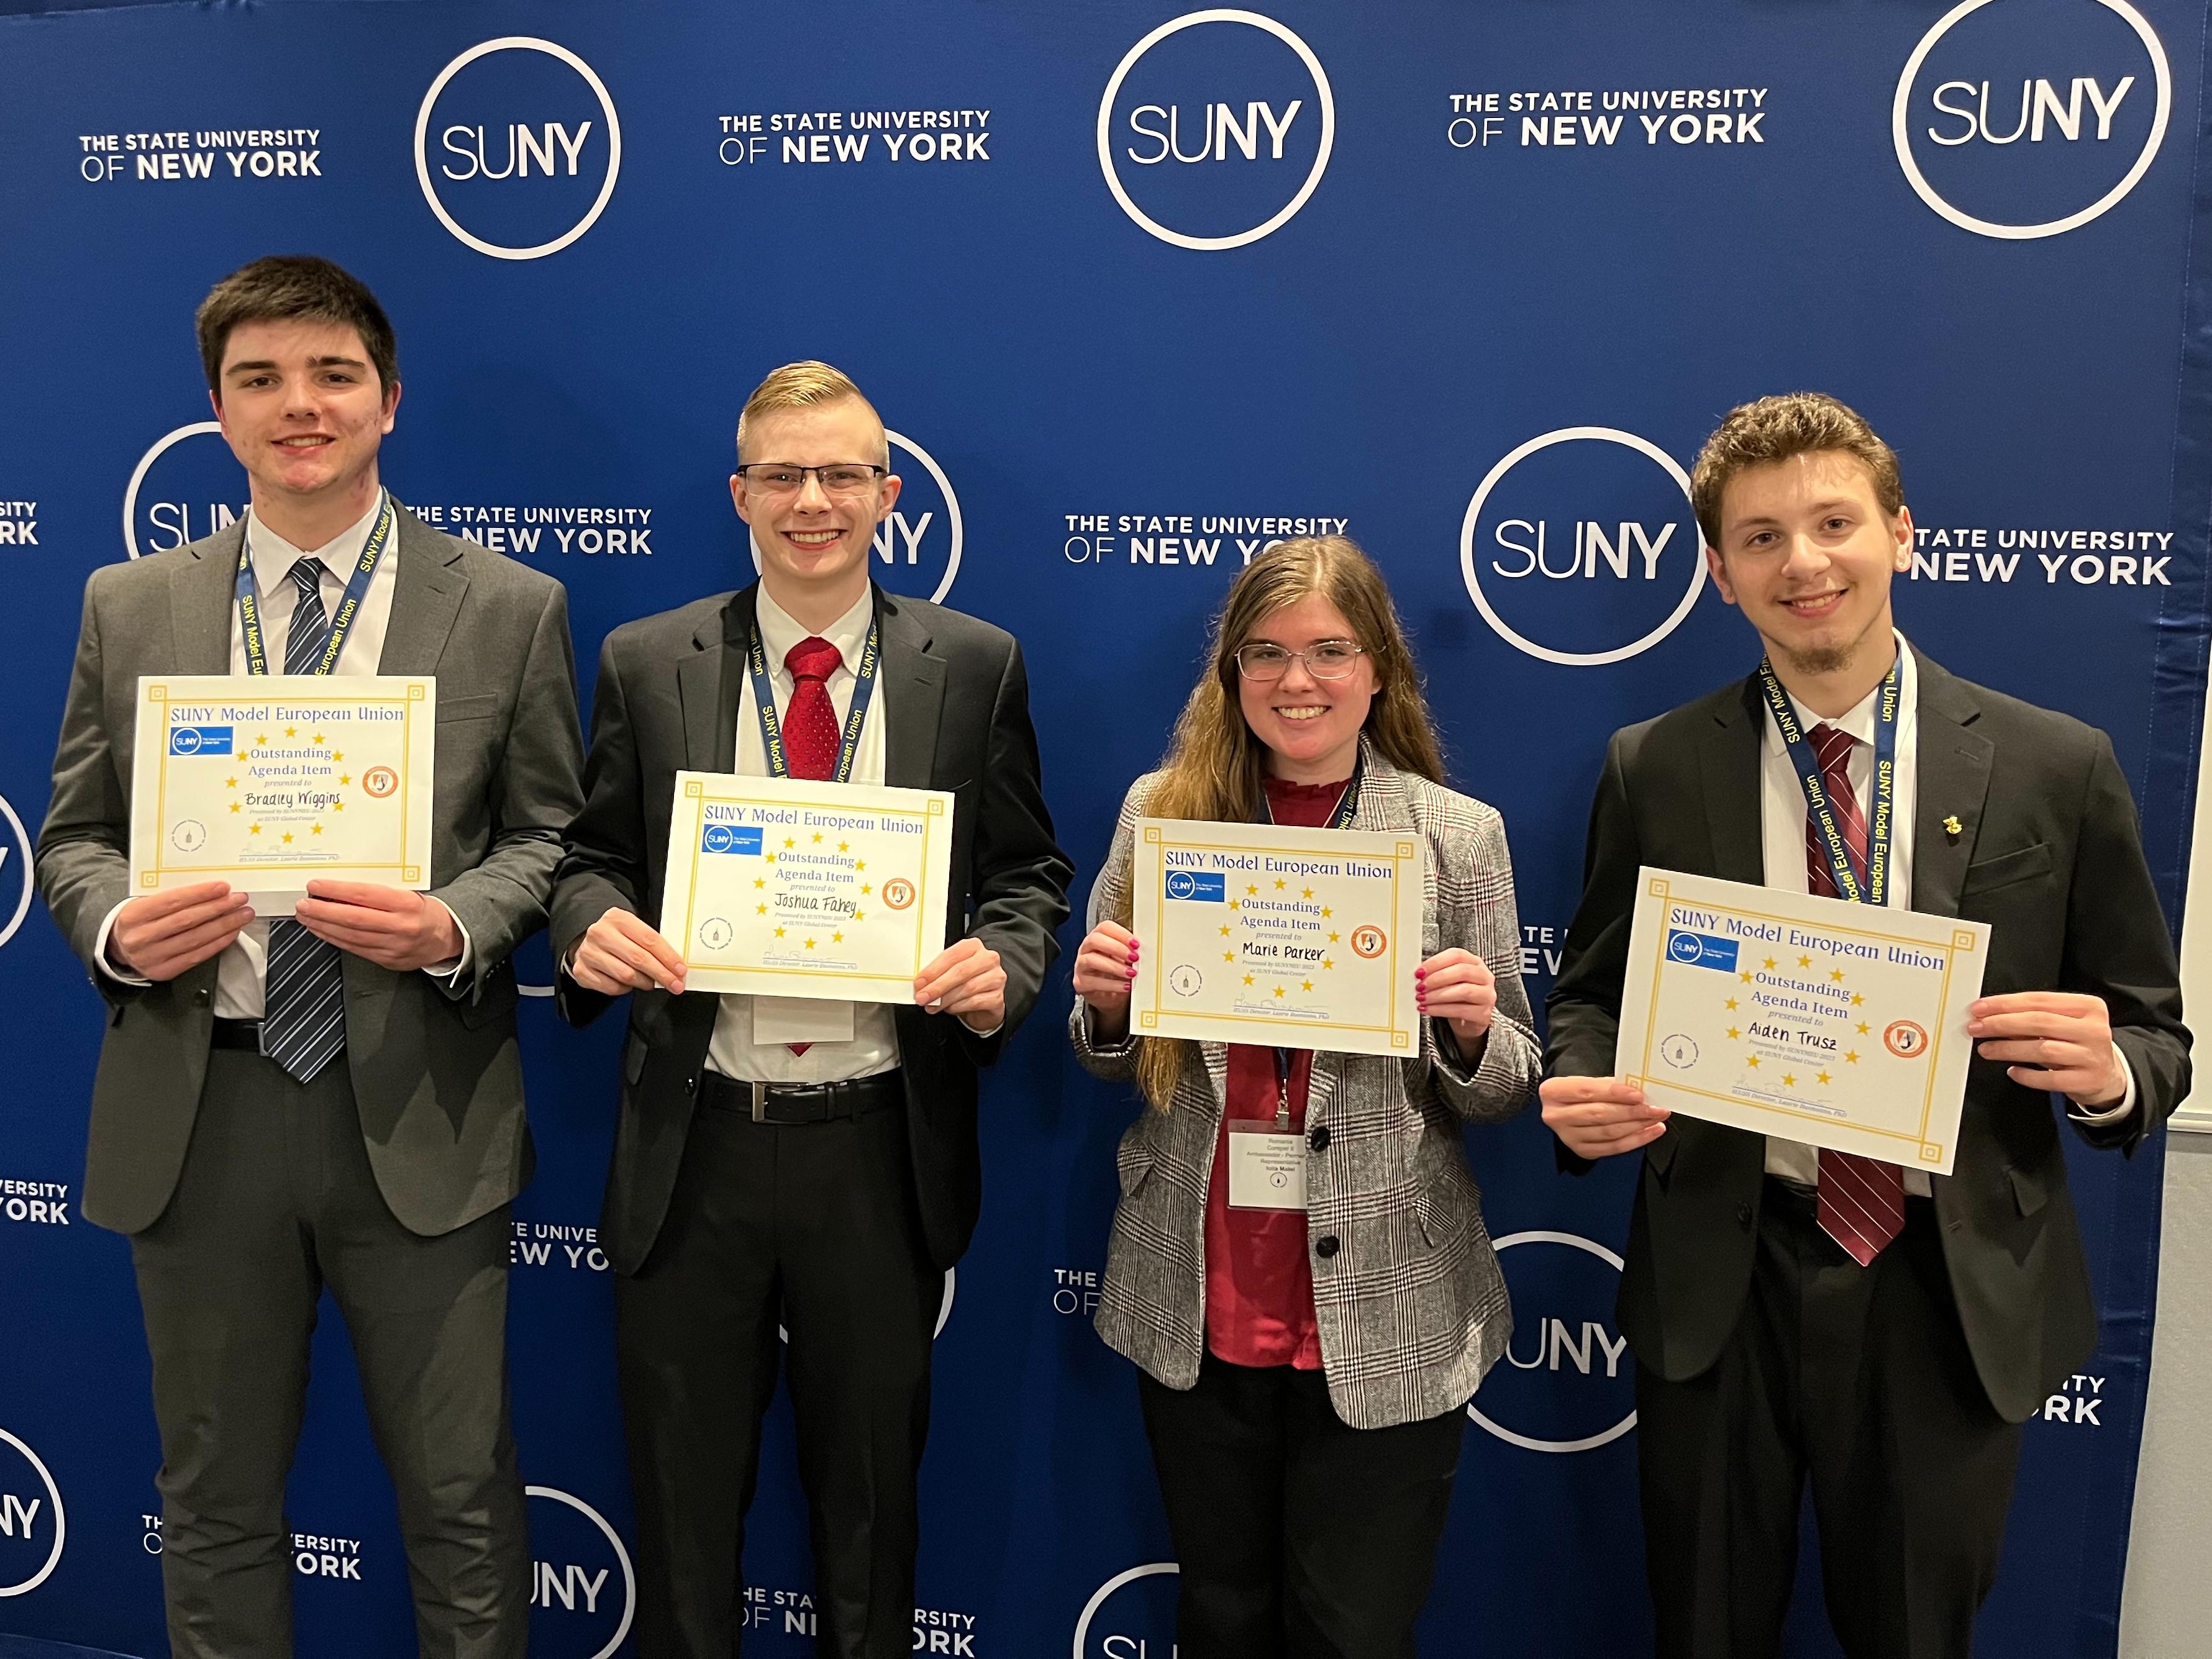 SUNY Oswego students Bradley Wiggins, Joshua Fahey, Marie Park and Aidan Trusz recently excelled in the university's first-ever appearance at the SUNY Model European Union gathering.